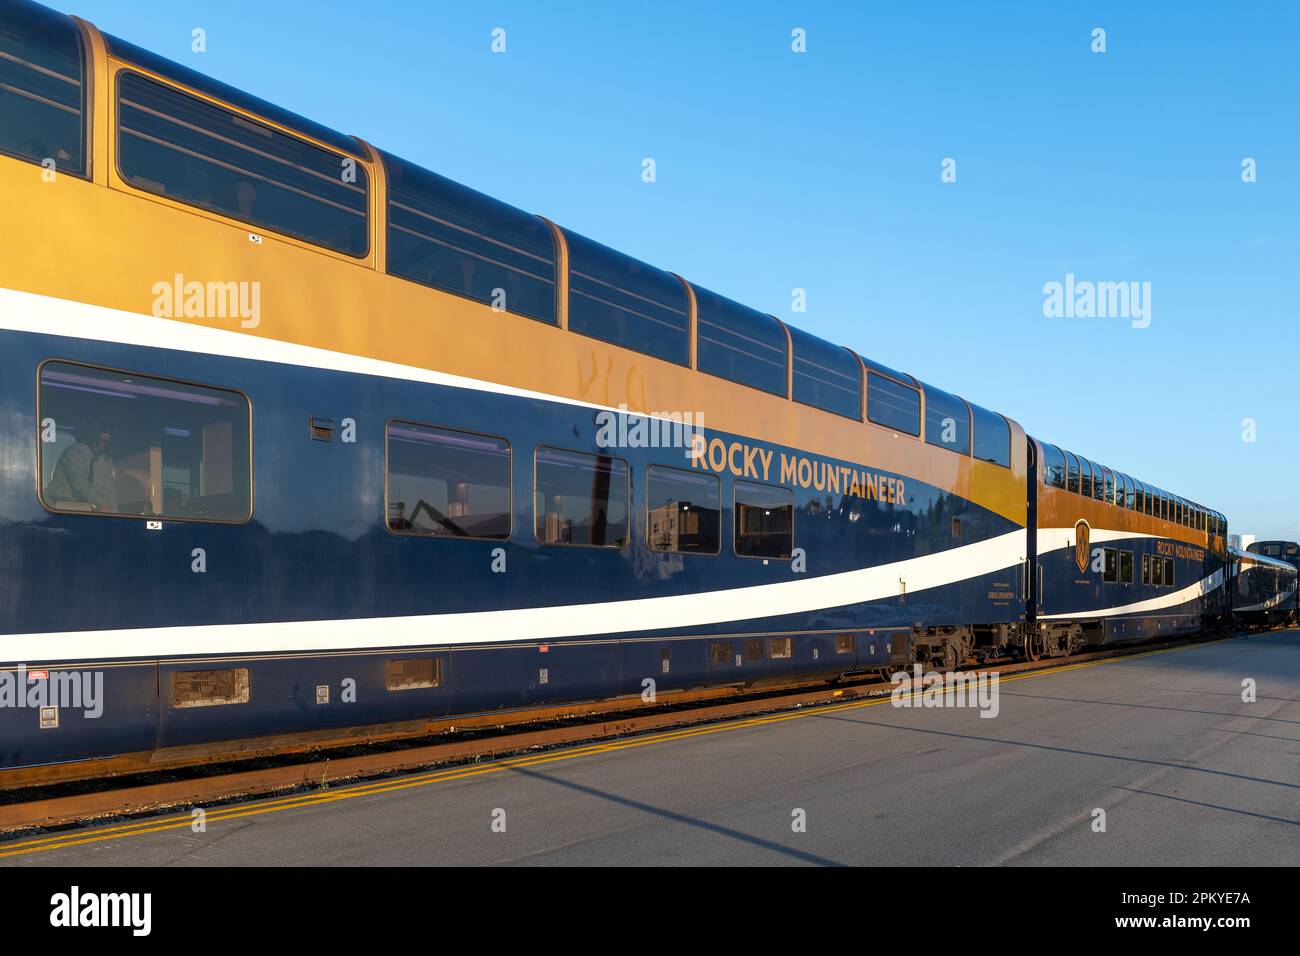 Goldfarbener Rocky Mountaineer Zugwaggon bei Sonnenaufgang in Vancouver Station. Stockfoto